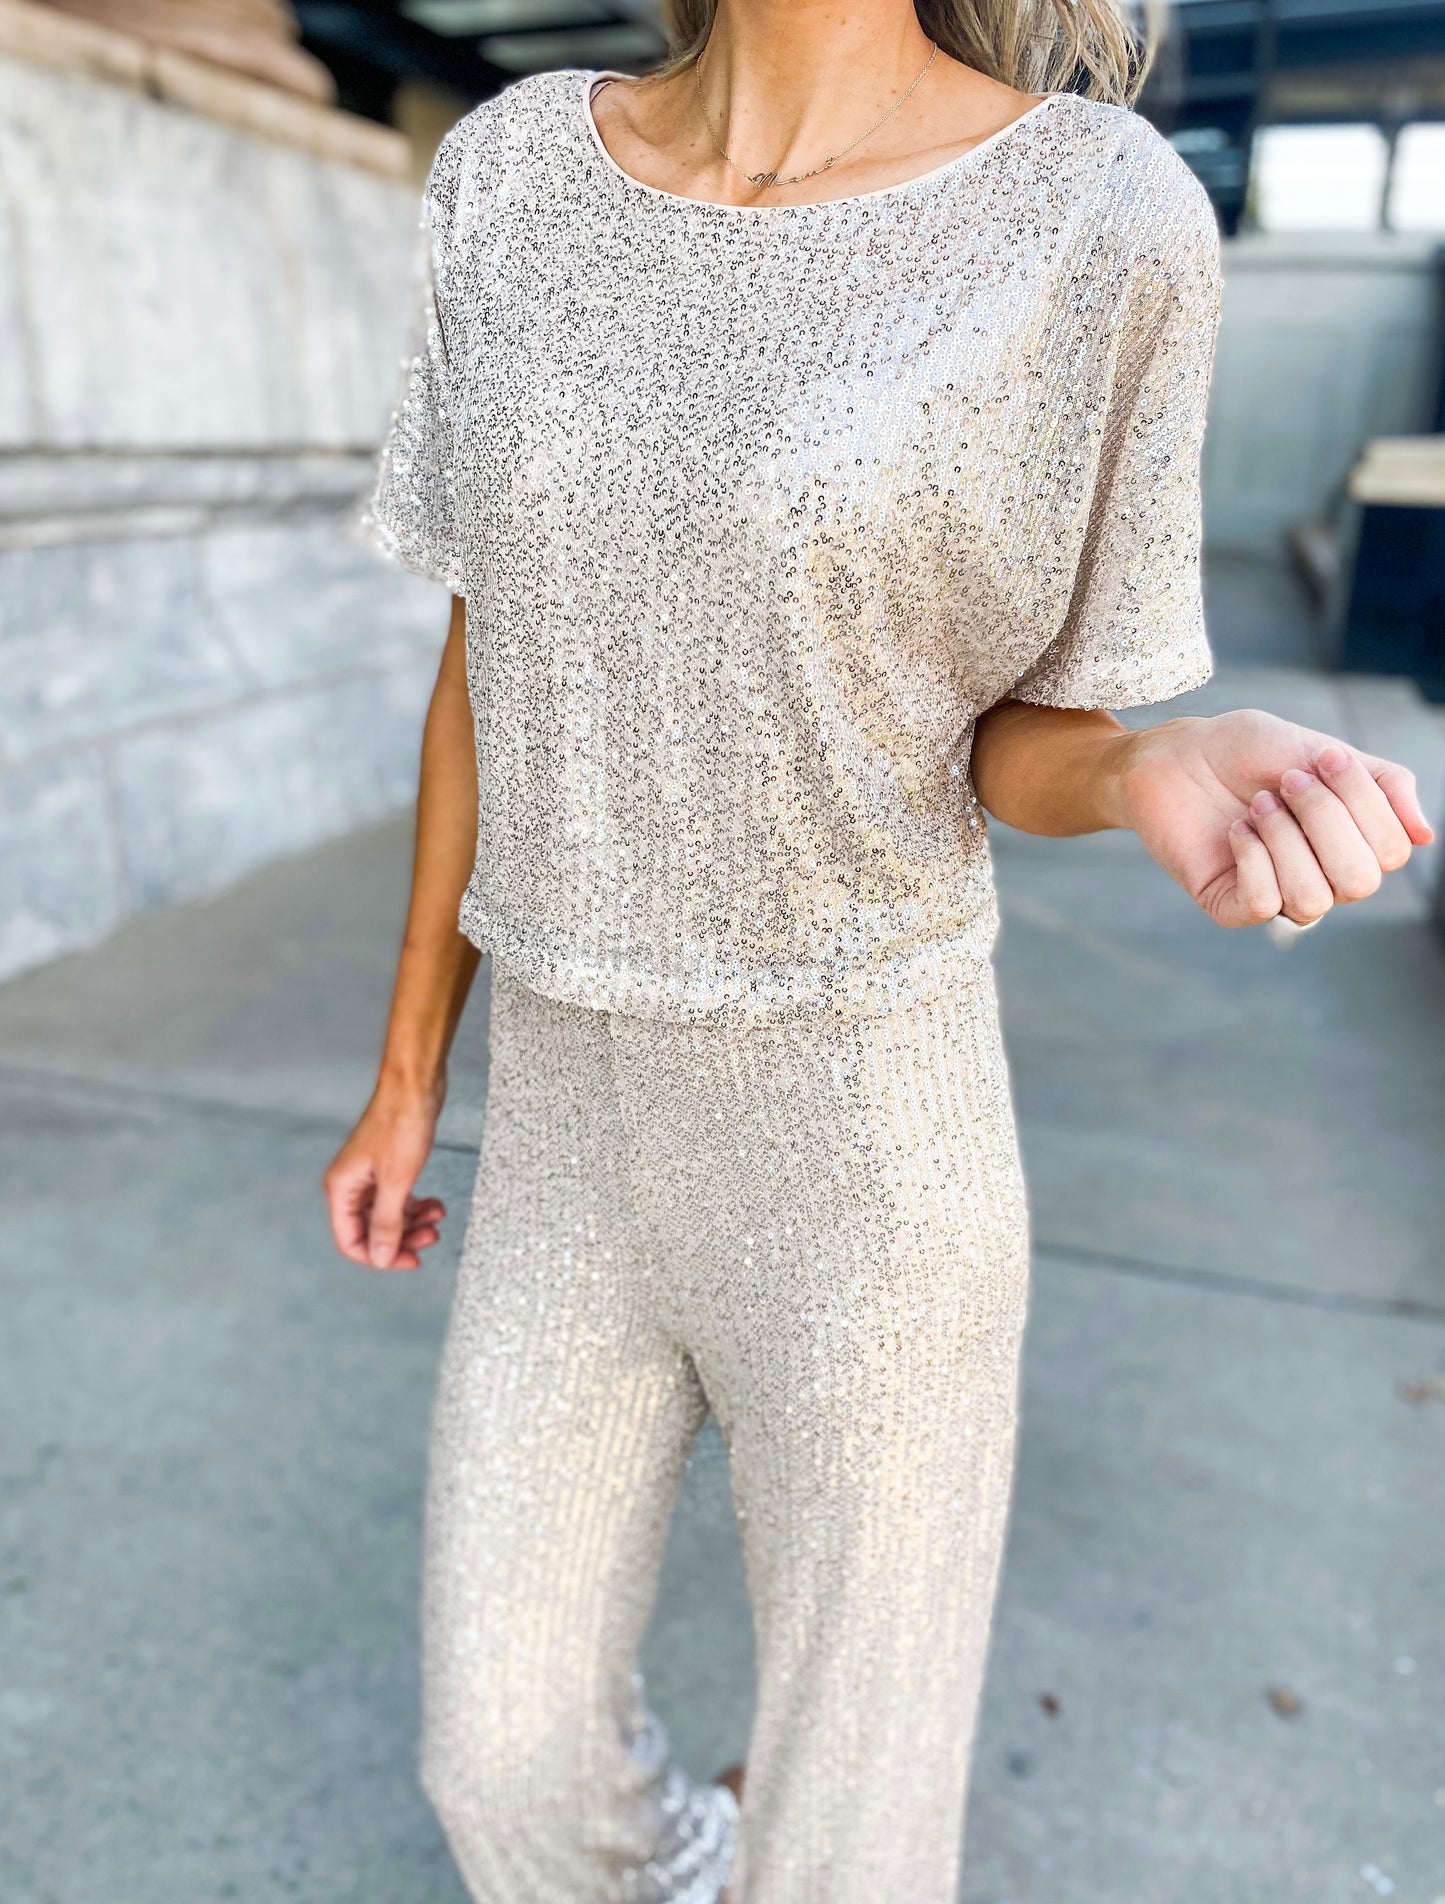 Choose to Sparkle Batwing Sleeve Sequin Top